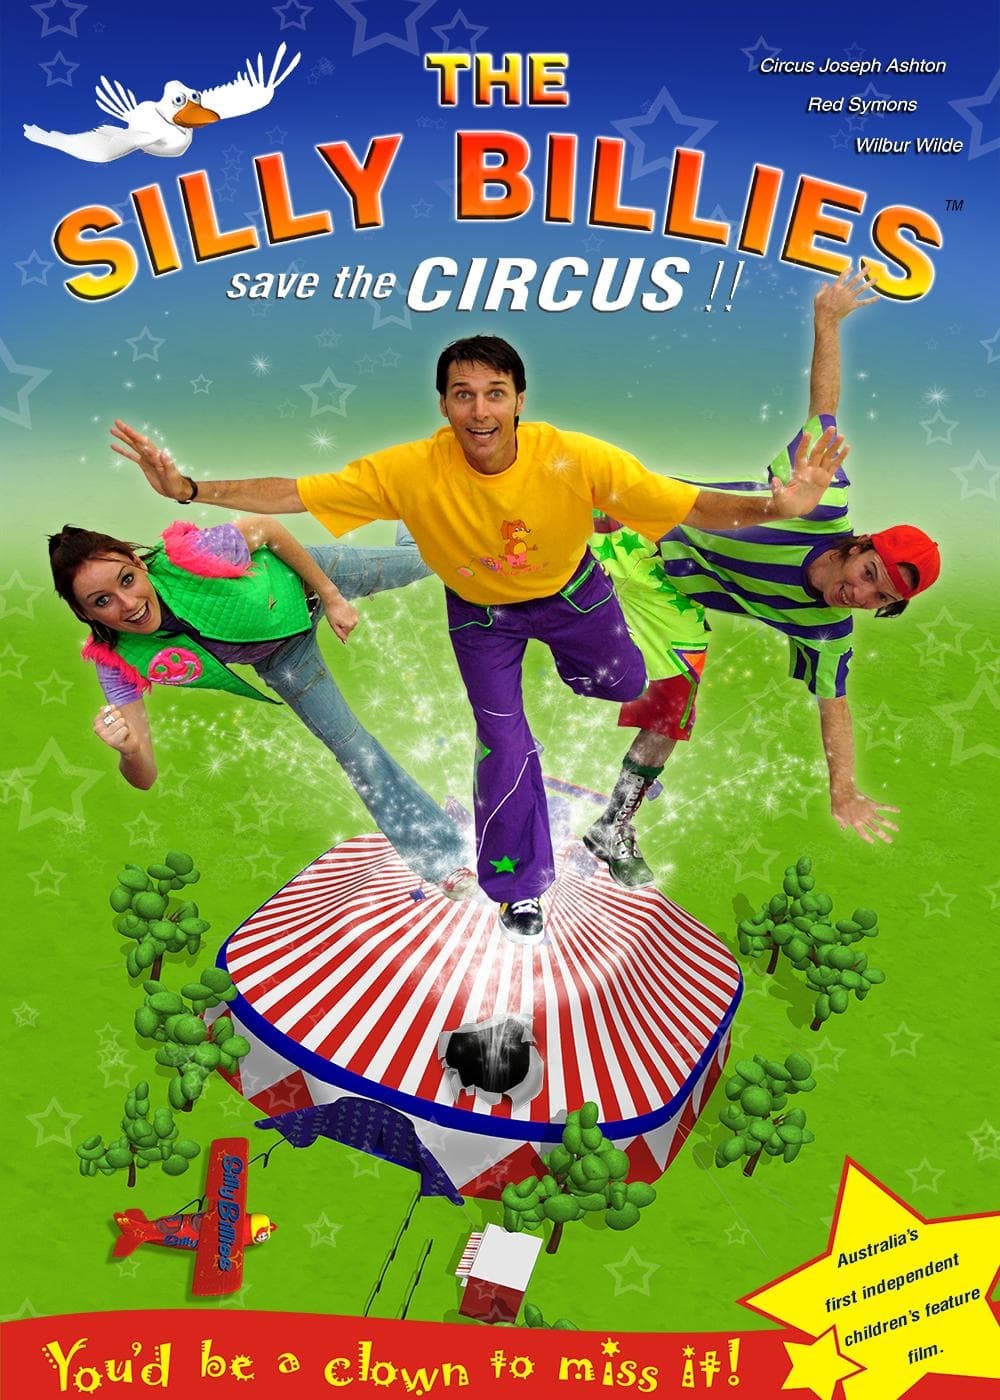 The Silly Billies Save the Circus!